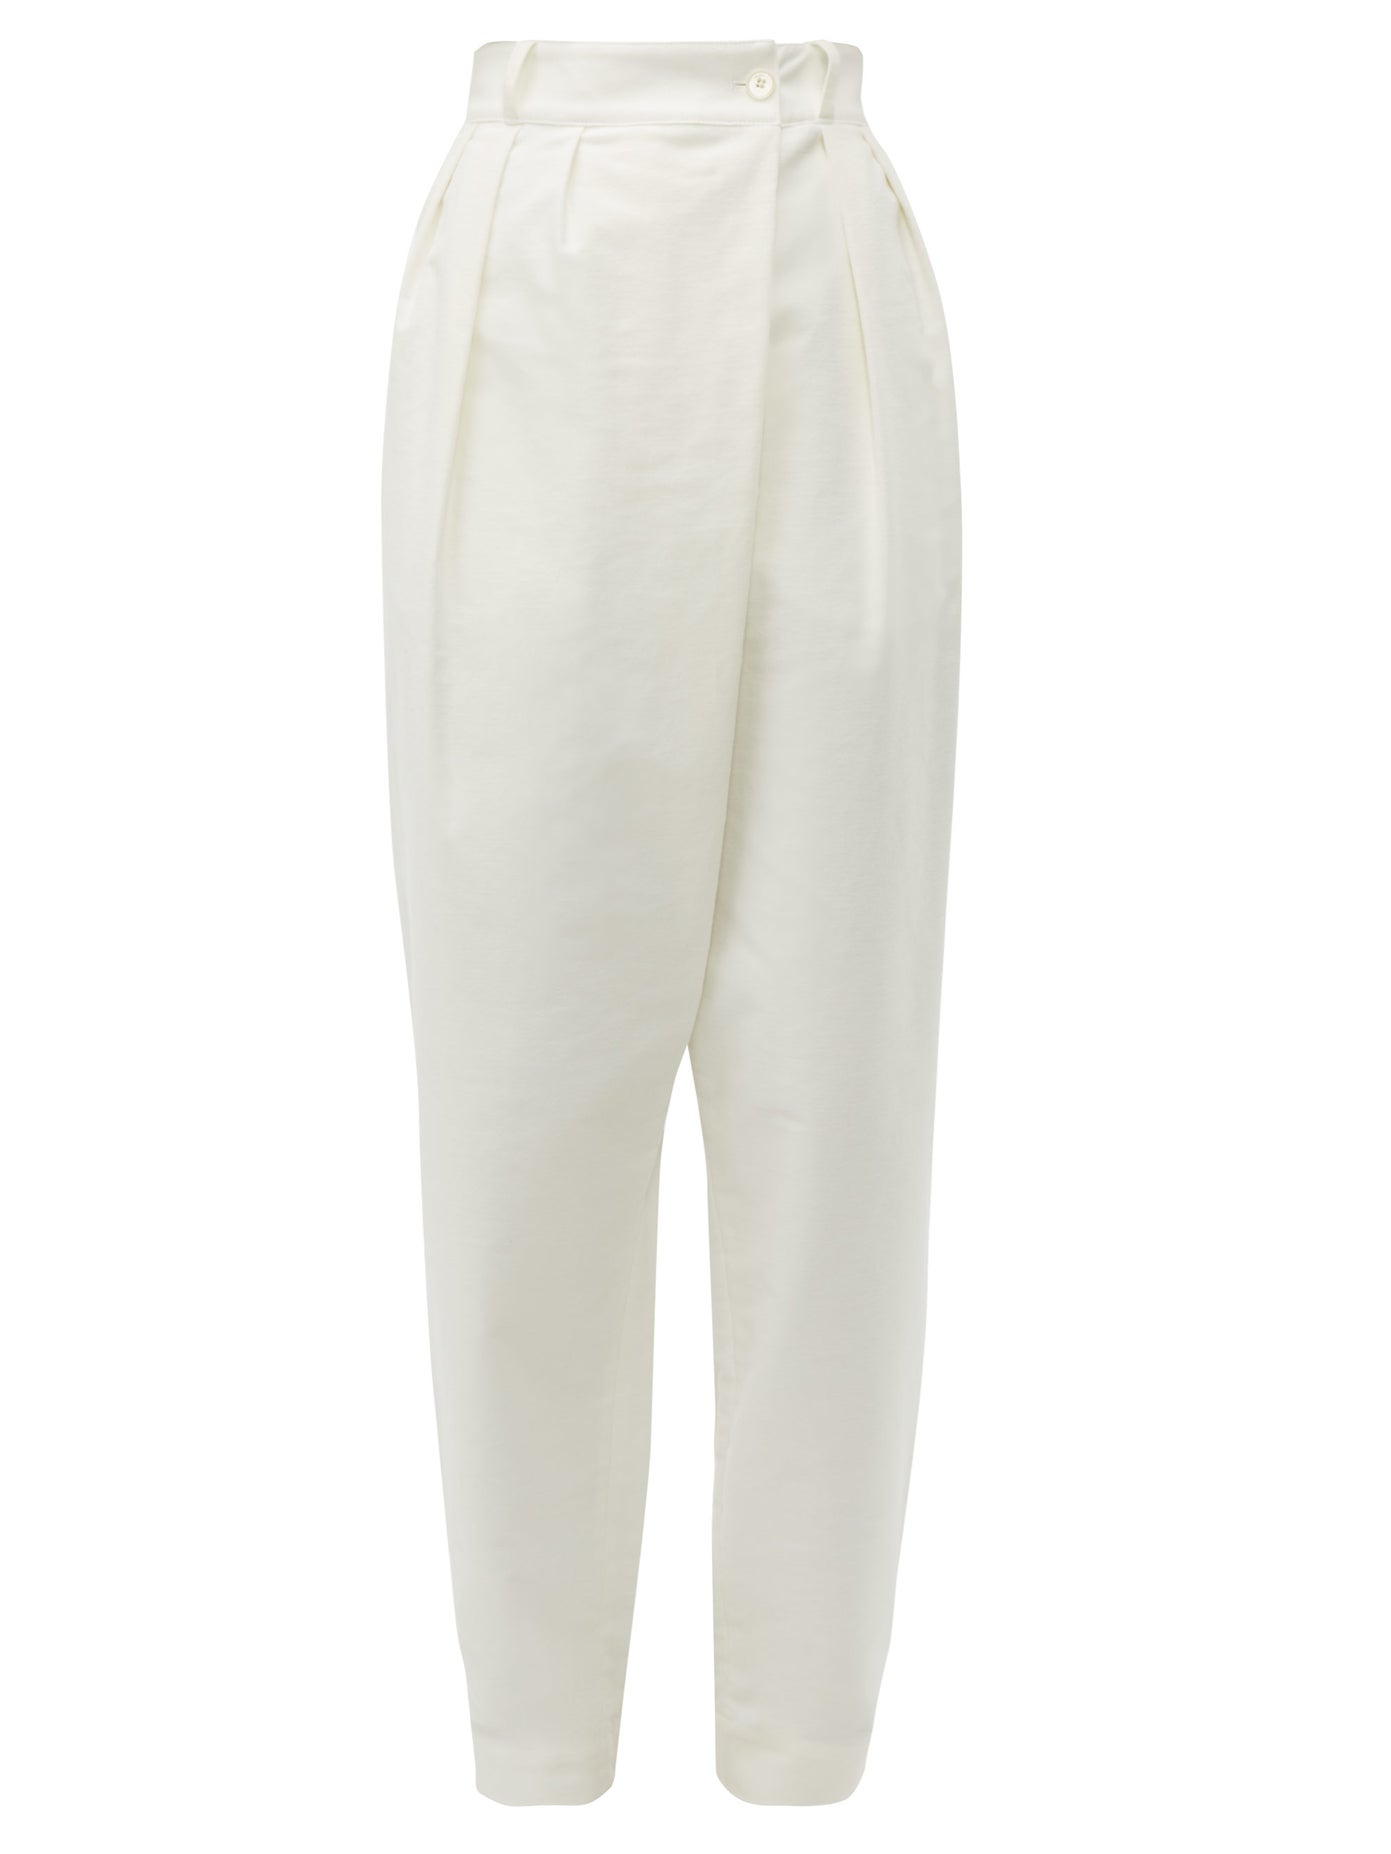 Lemaire - Asymmetric Moleskin Trousers | ABOUT ICONS